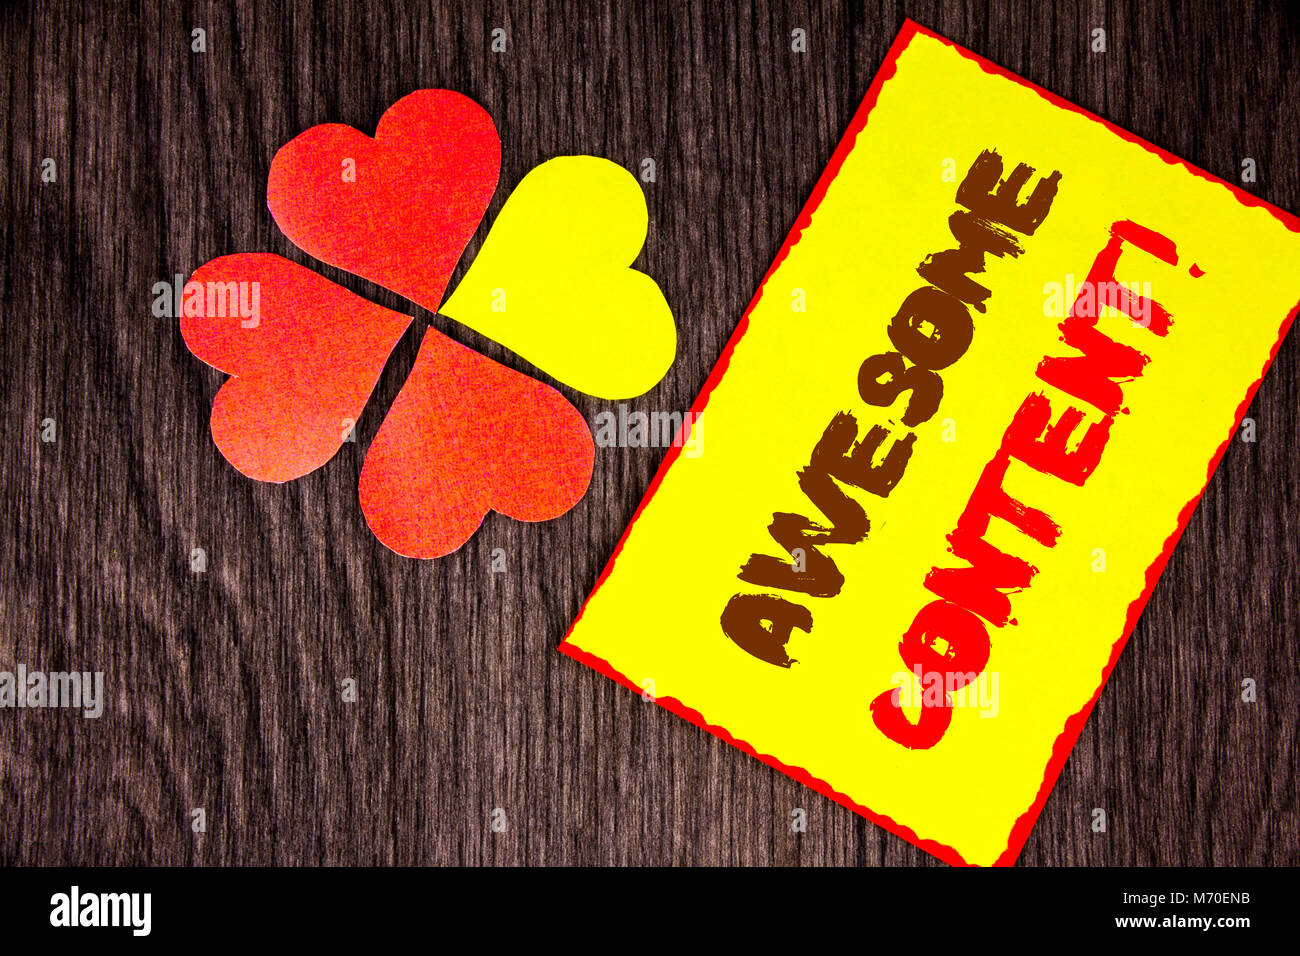 Text sign showing Awesome Content. Business concept for Creative Strategy Education Website Concept written Sticky Note Paper with Love Heart Next to  Stock Photo